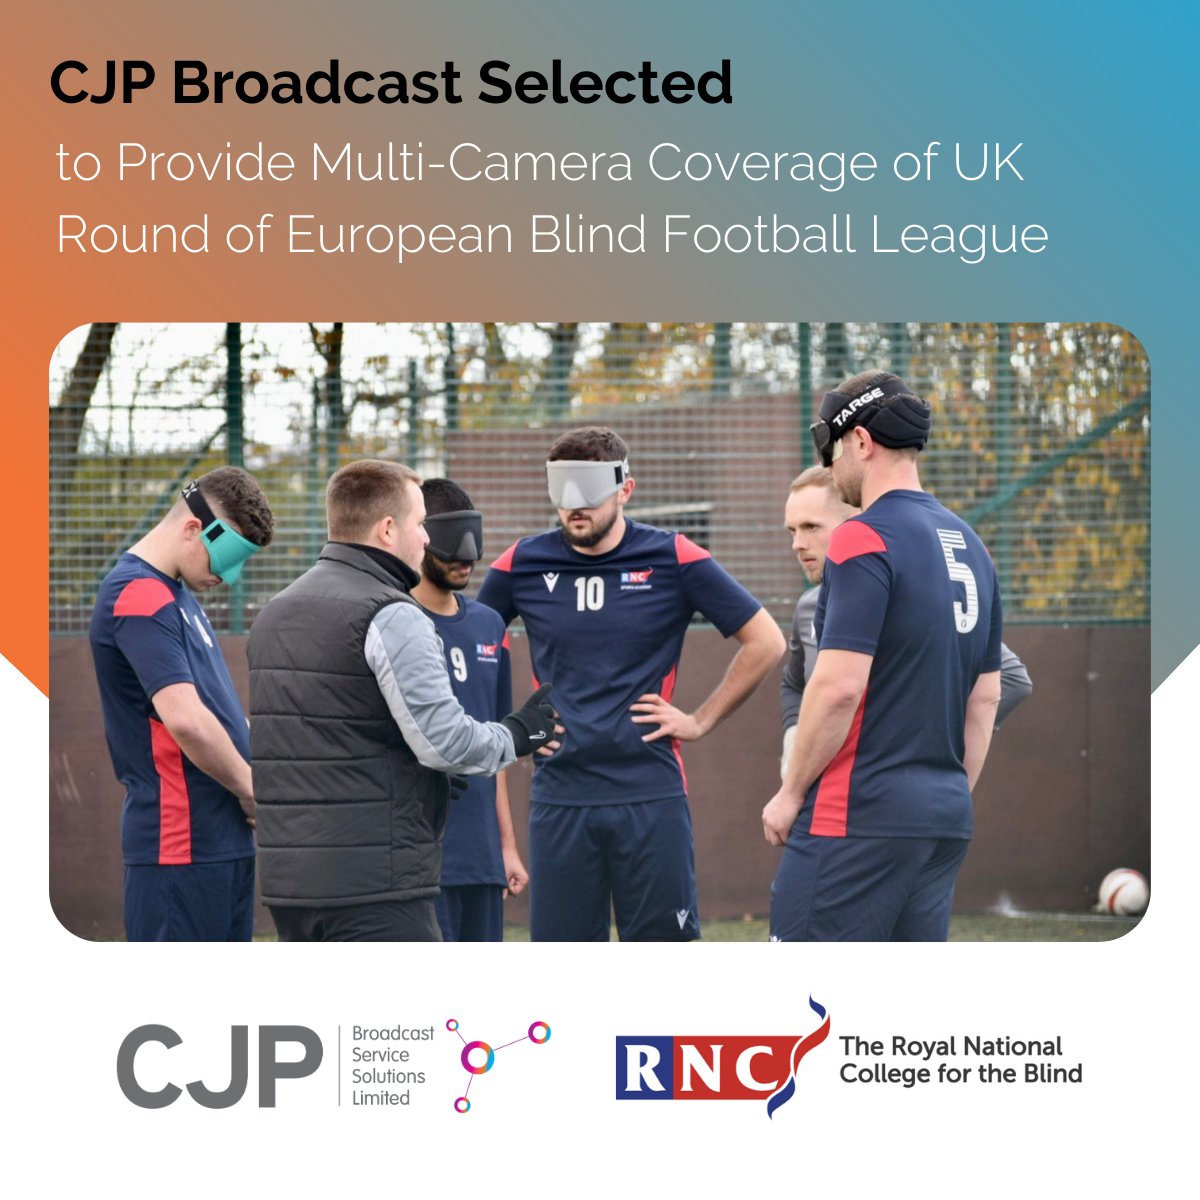 “We're honored to support the Royal National College for the Blind's ongoing development of #blindsports.” Chris Phillips talks ahead of this week’s #EuropeanBlindFootballLeague: bit.ly/3luujmq #livesports #blindfootball #sportsbroadcast #broadcast #EBFL @RNC_Hereford